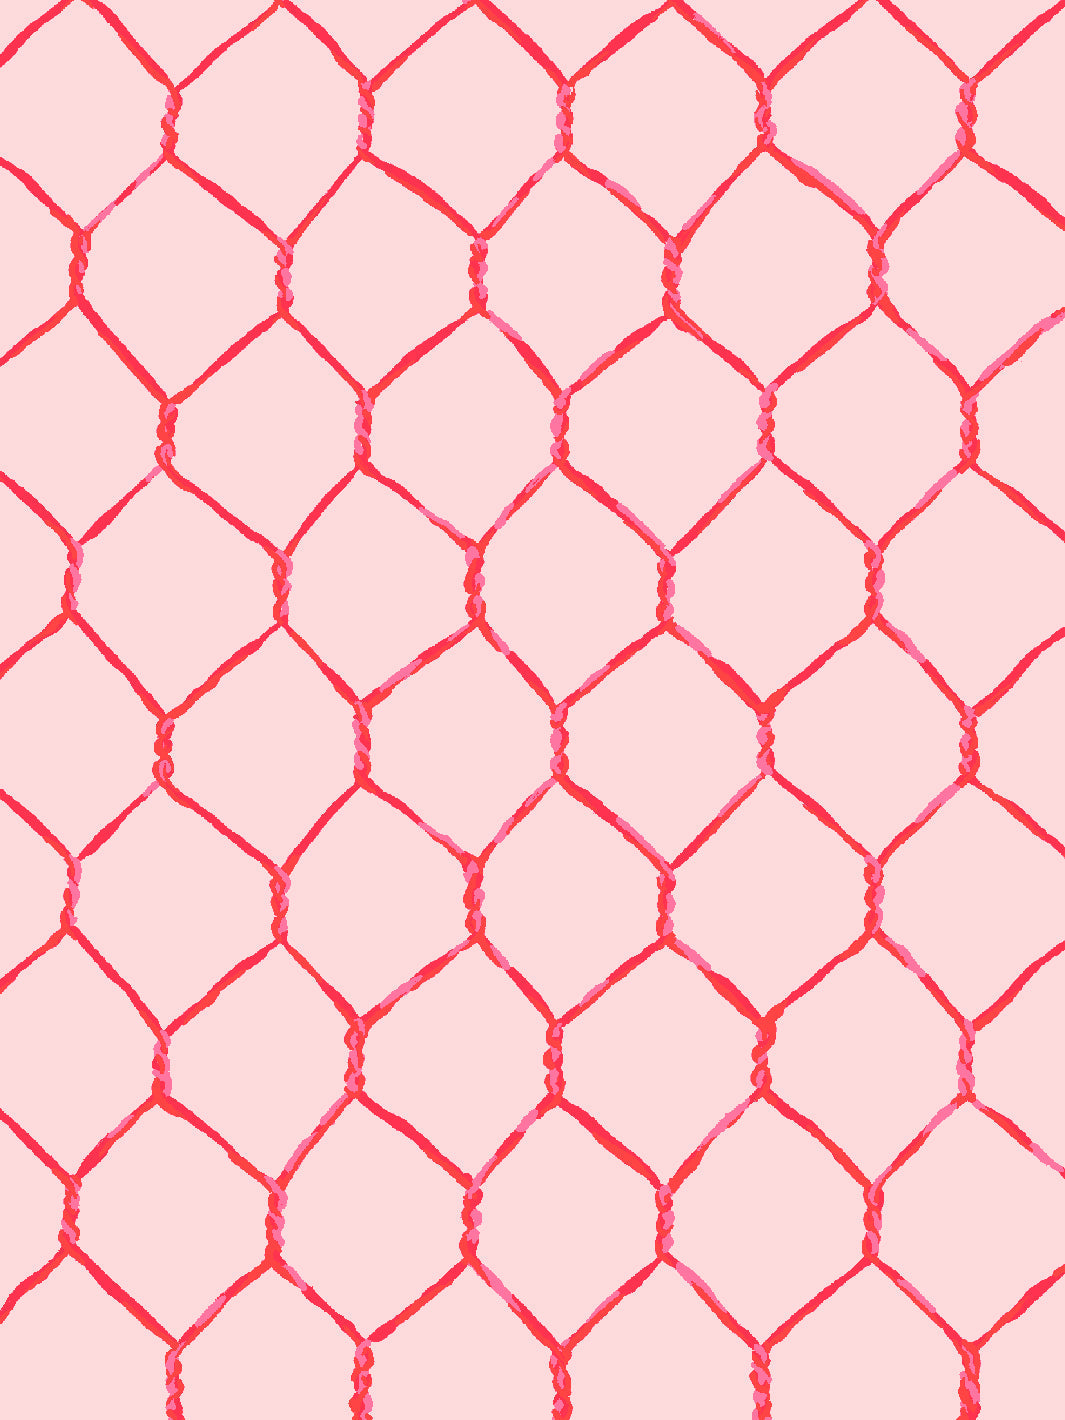 'Evelyn's Chicken Wire' Wallpaper by Sarah Jessica Parker - Punch on Pink